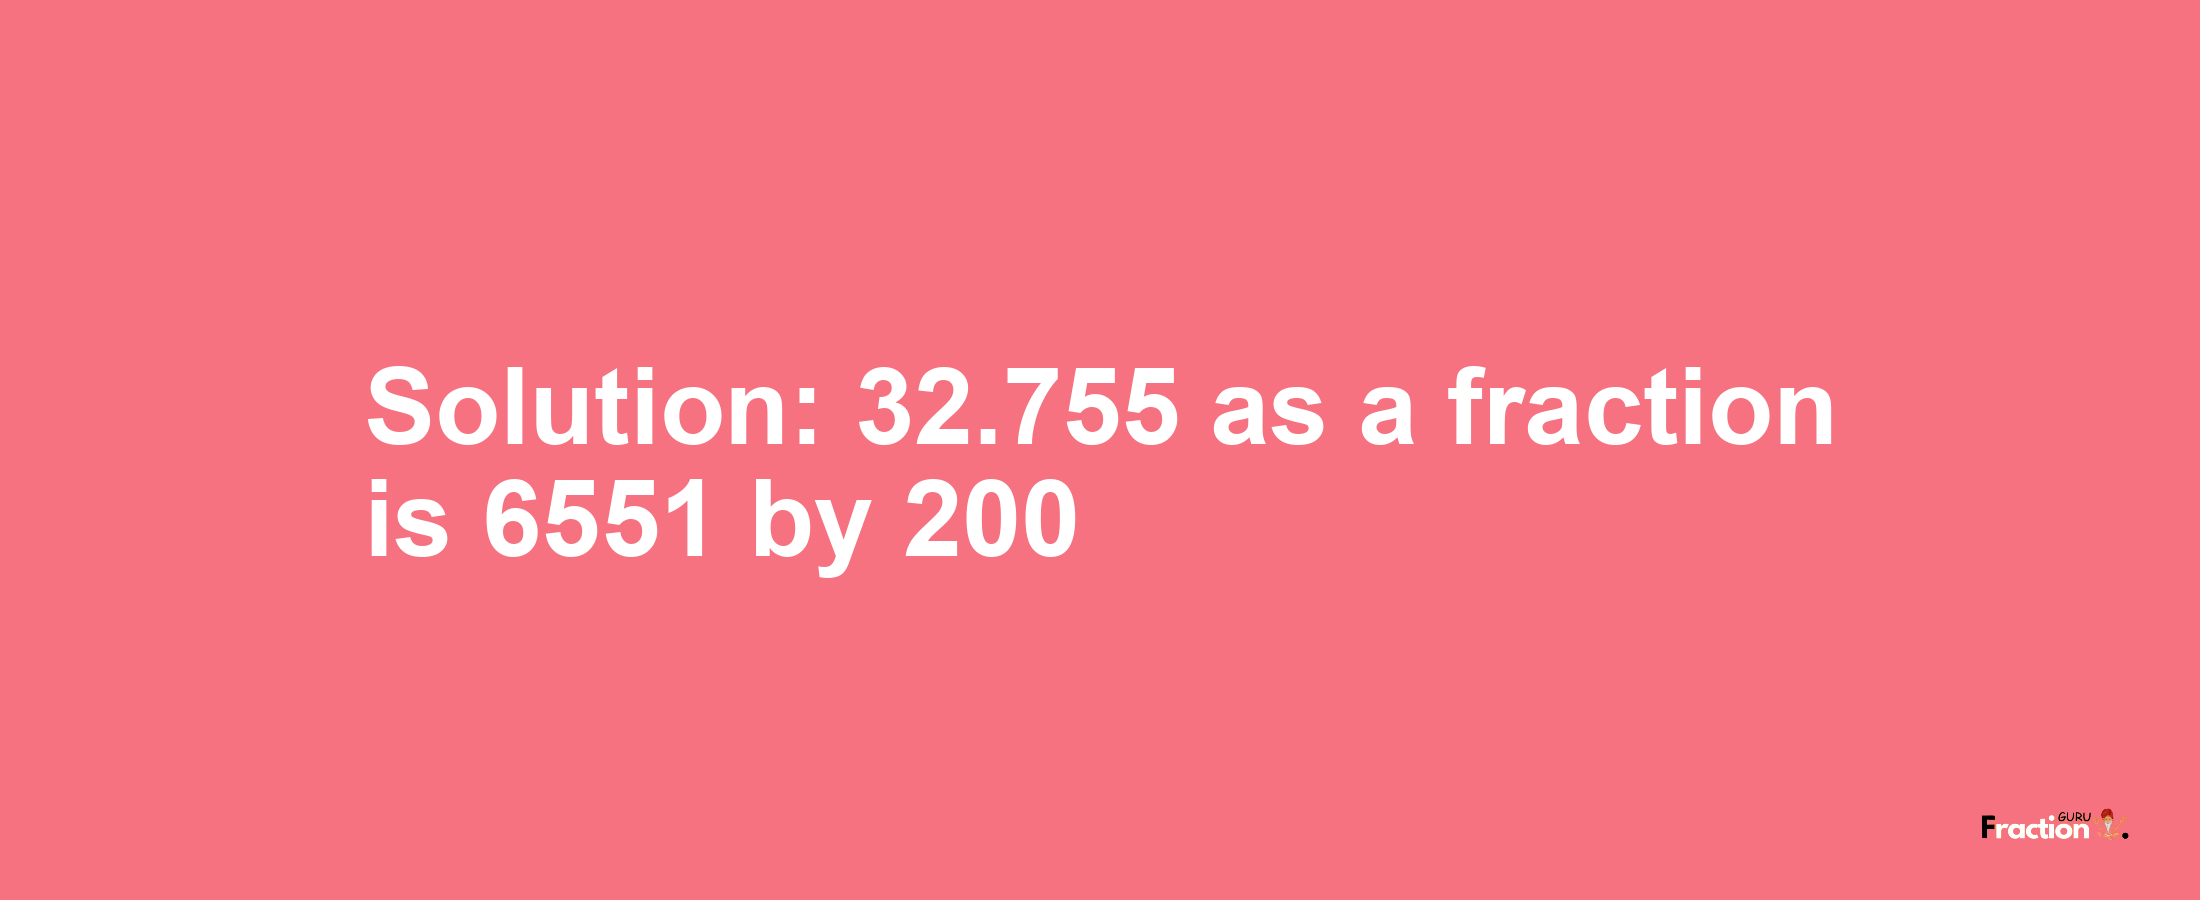 Solution:32.755 as a fraction is 6551/200